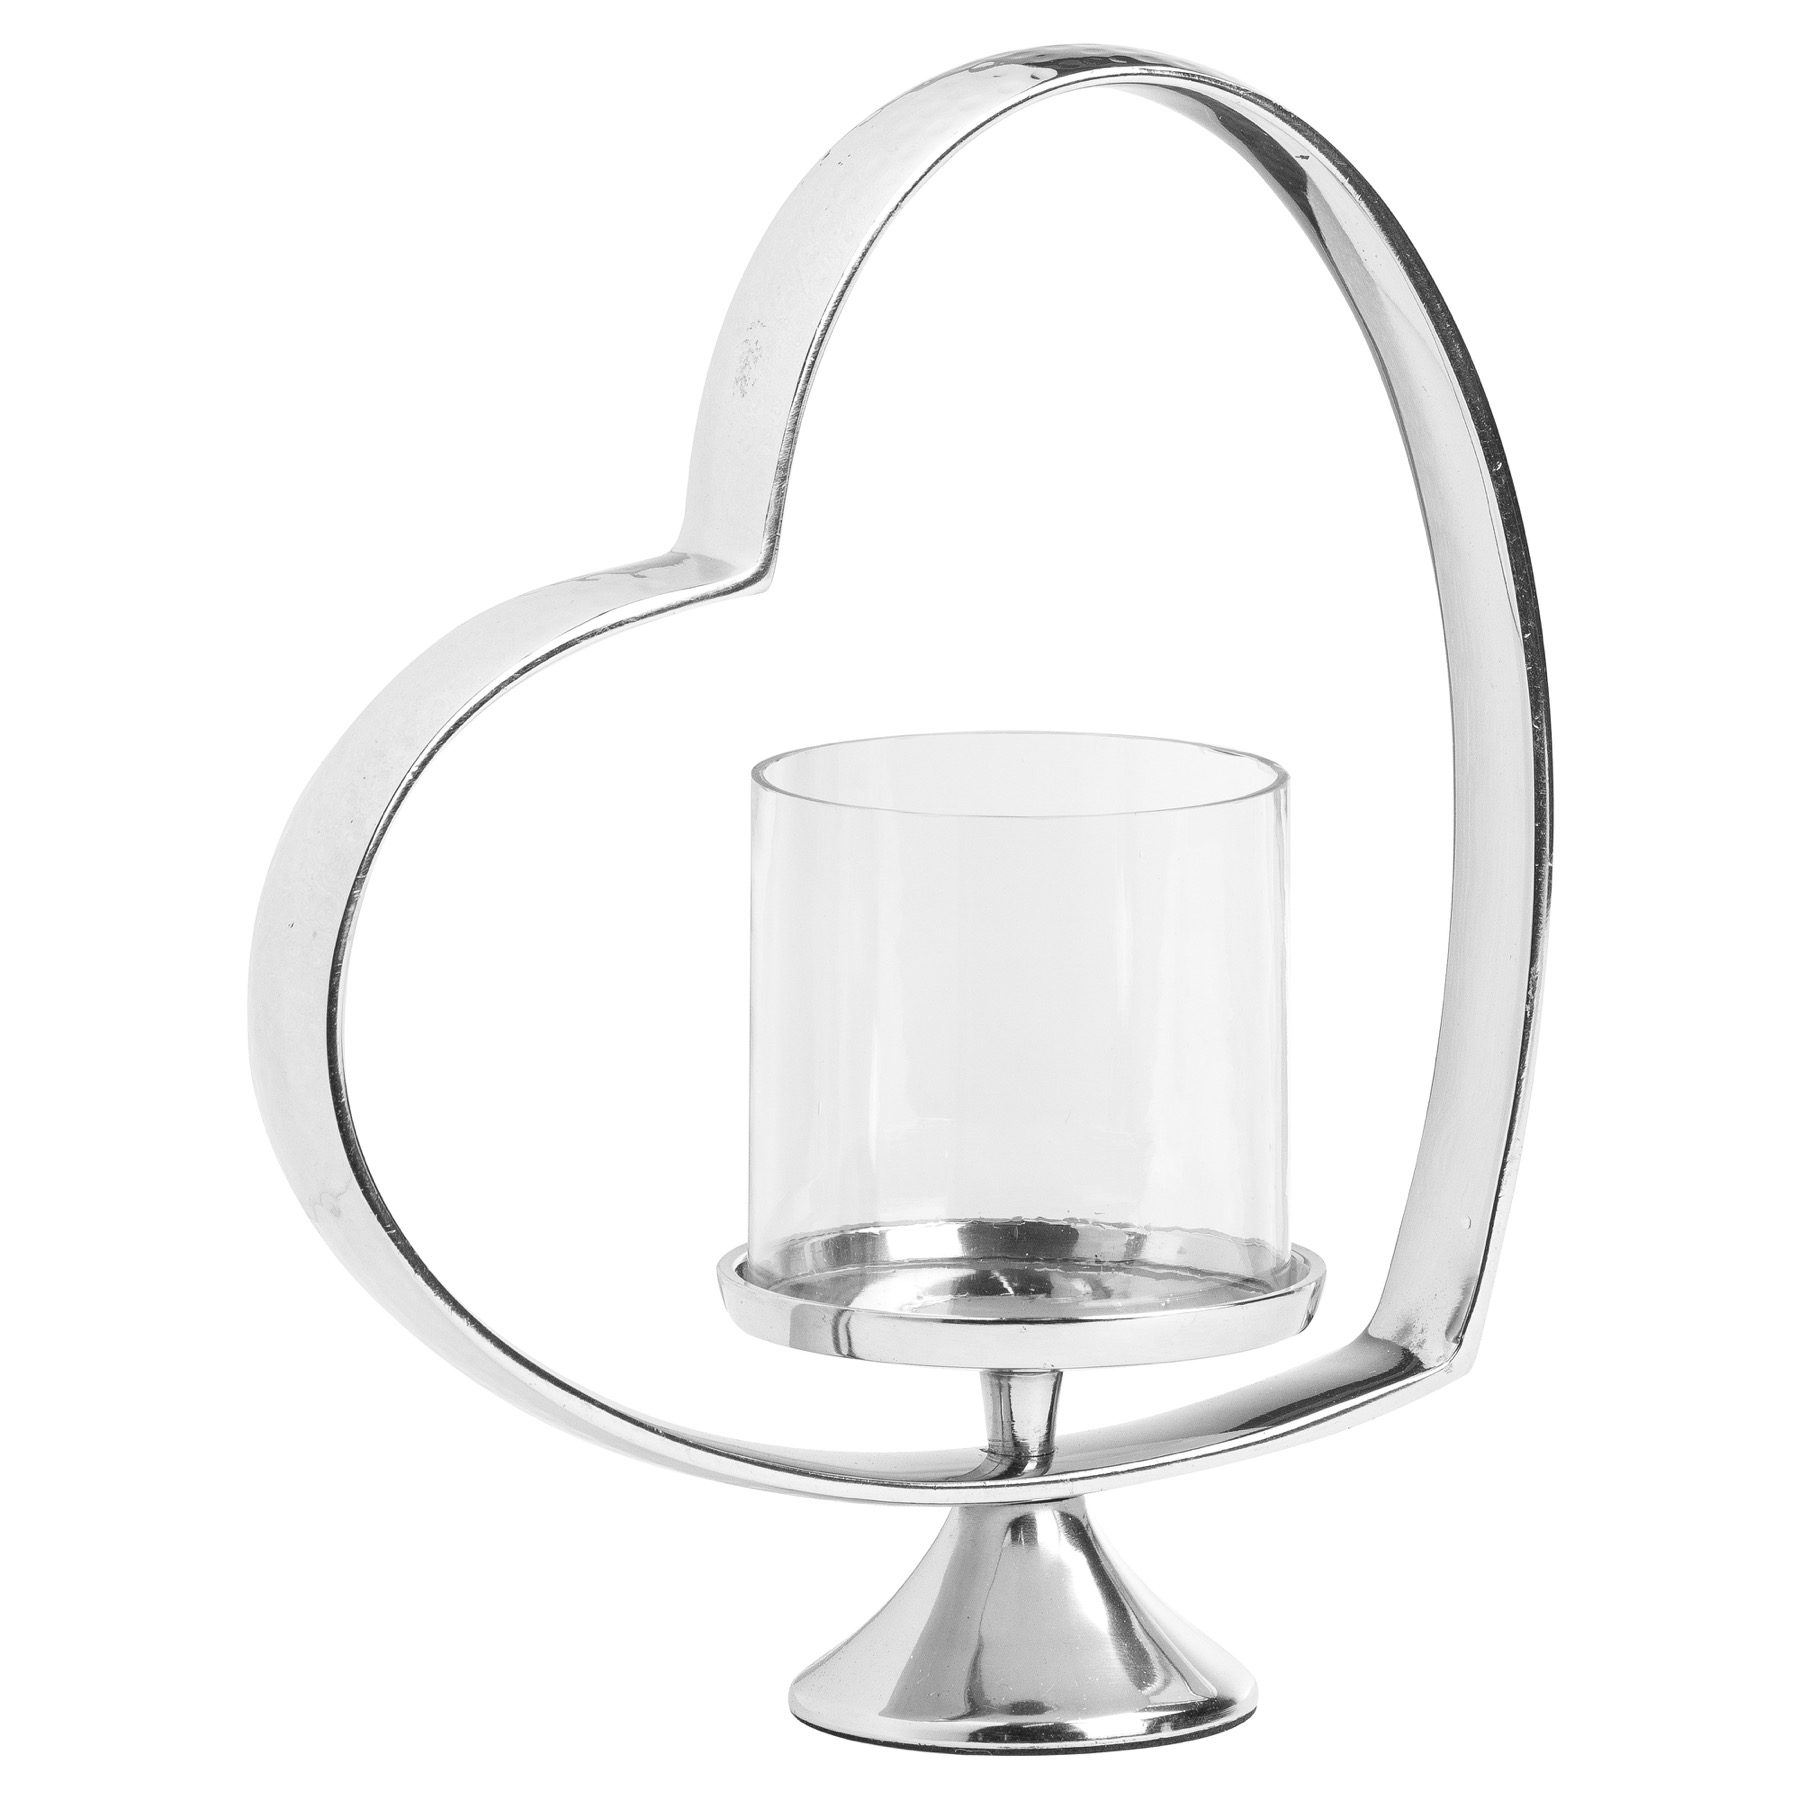 Heart Shaped Nickel Plated Candle Holder - Image 1